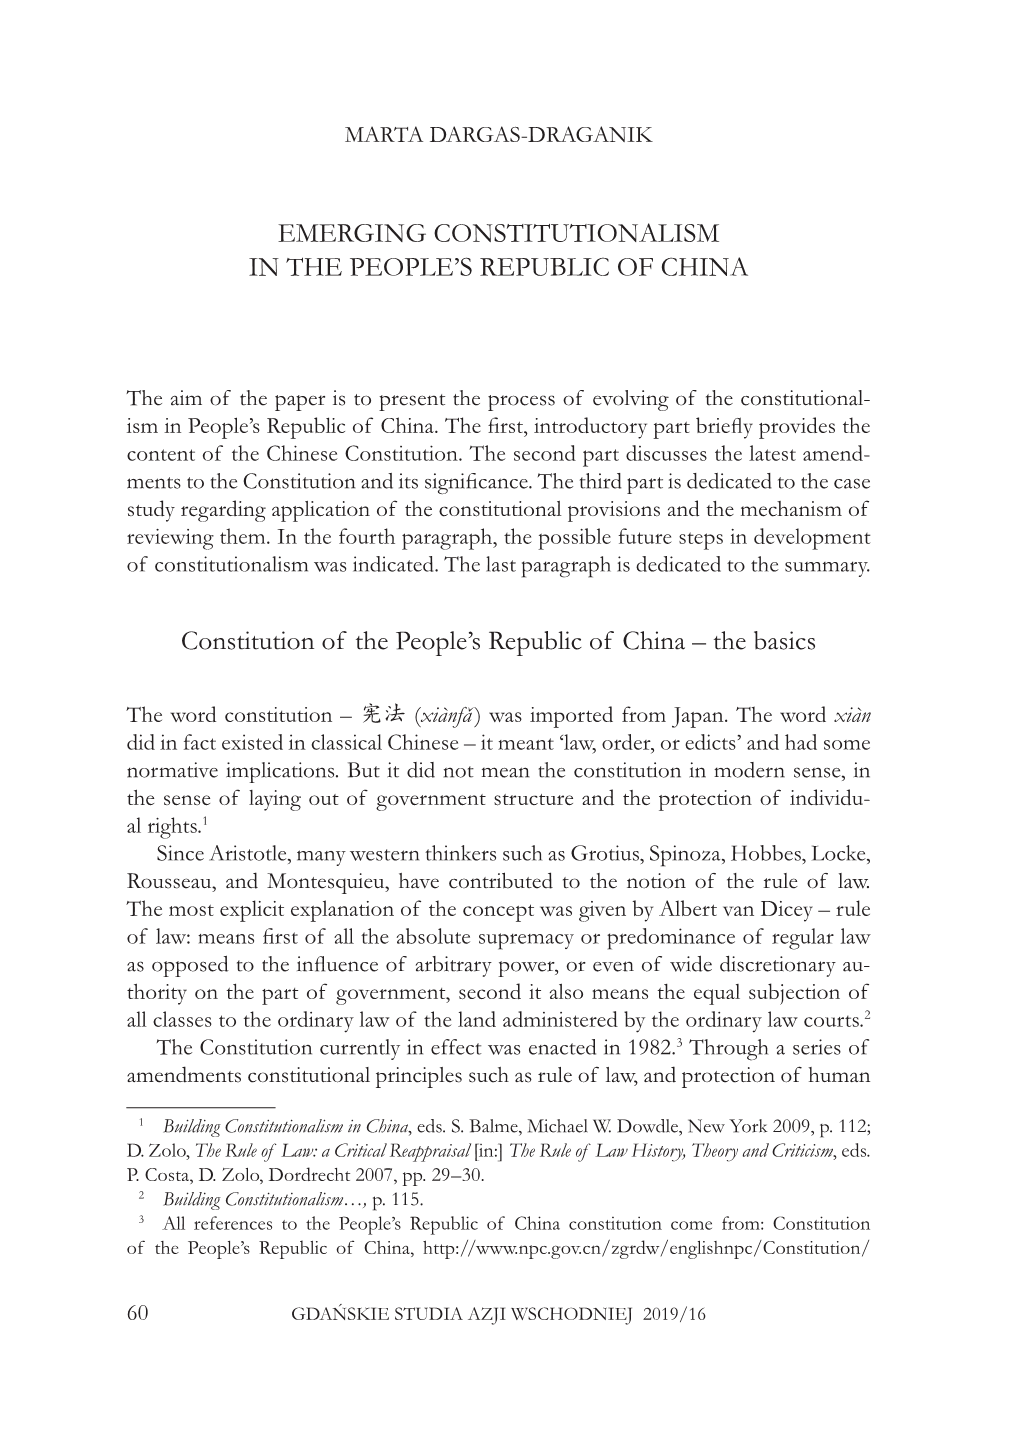 Emerging Constitutionalism in the People's Republic of China